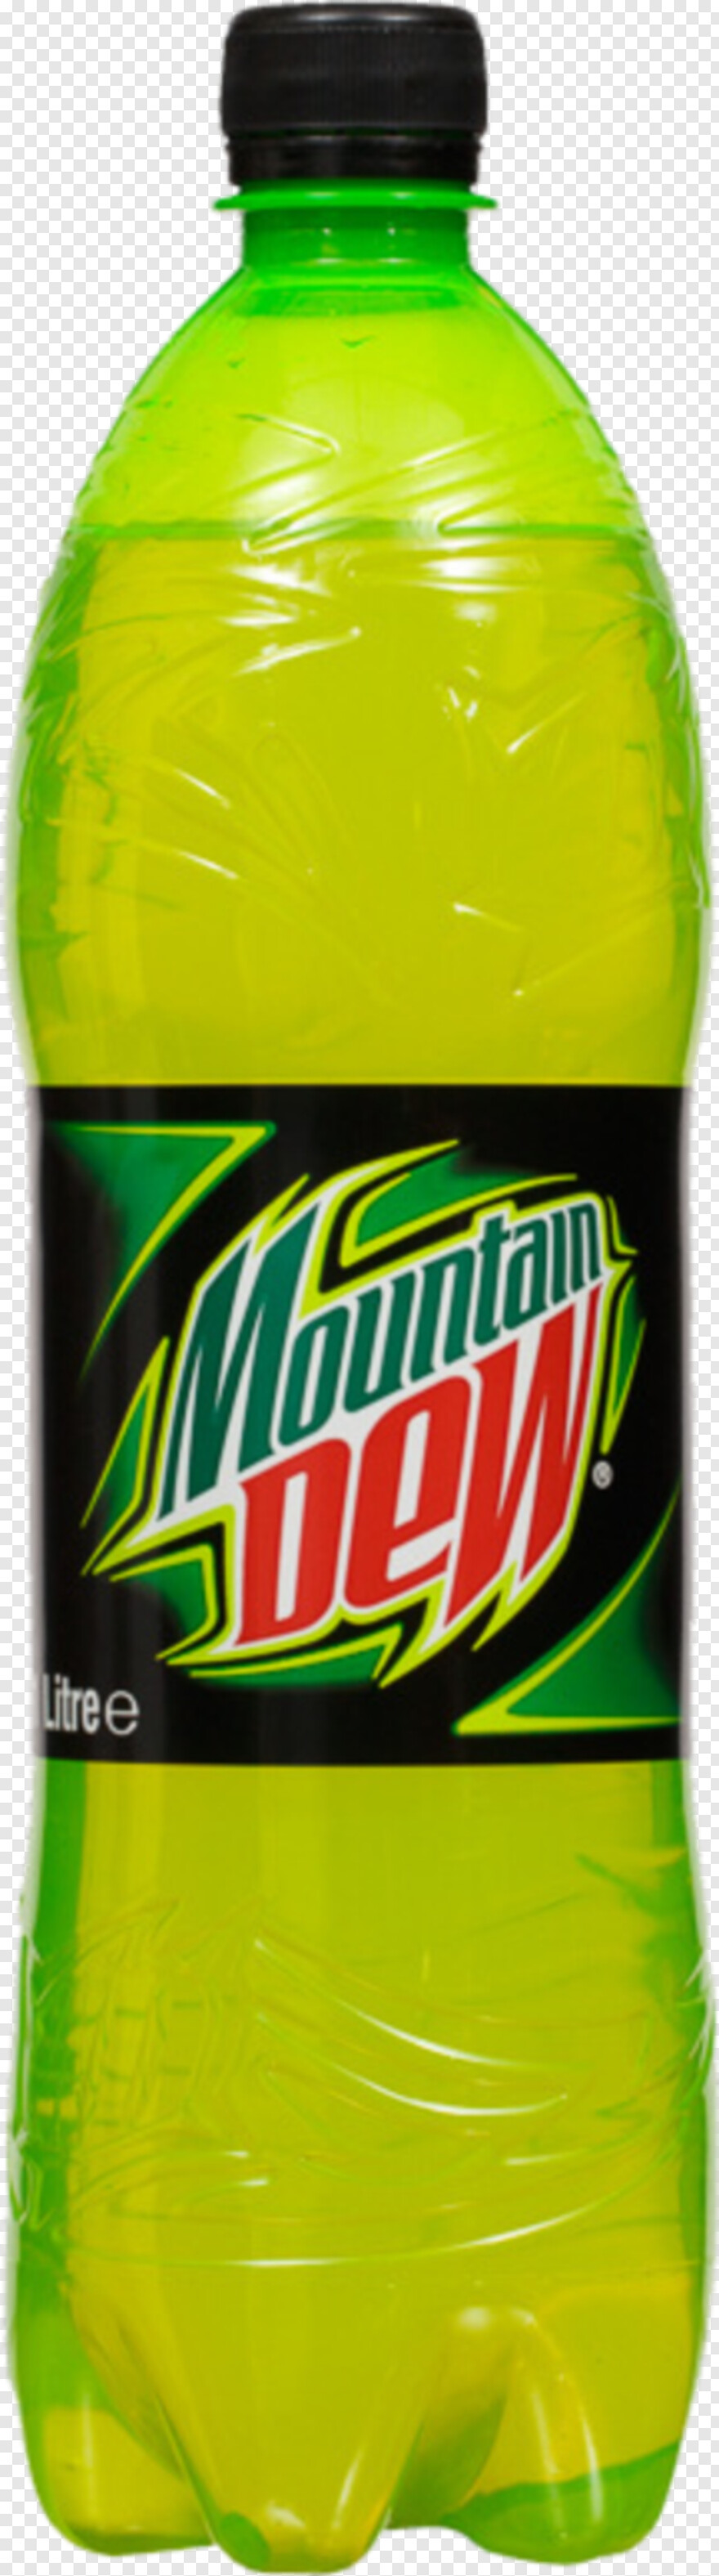 mountain-dew-can # 324746